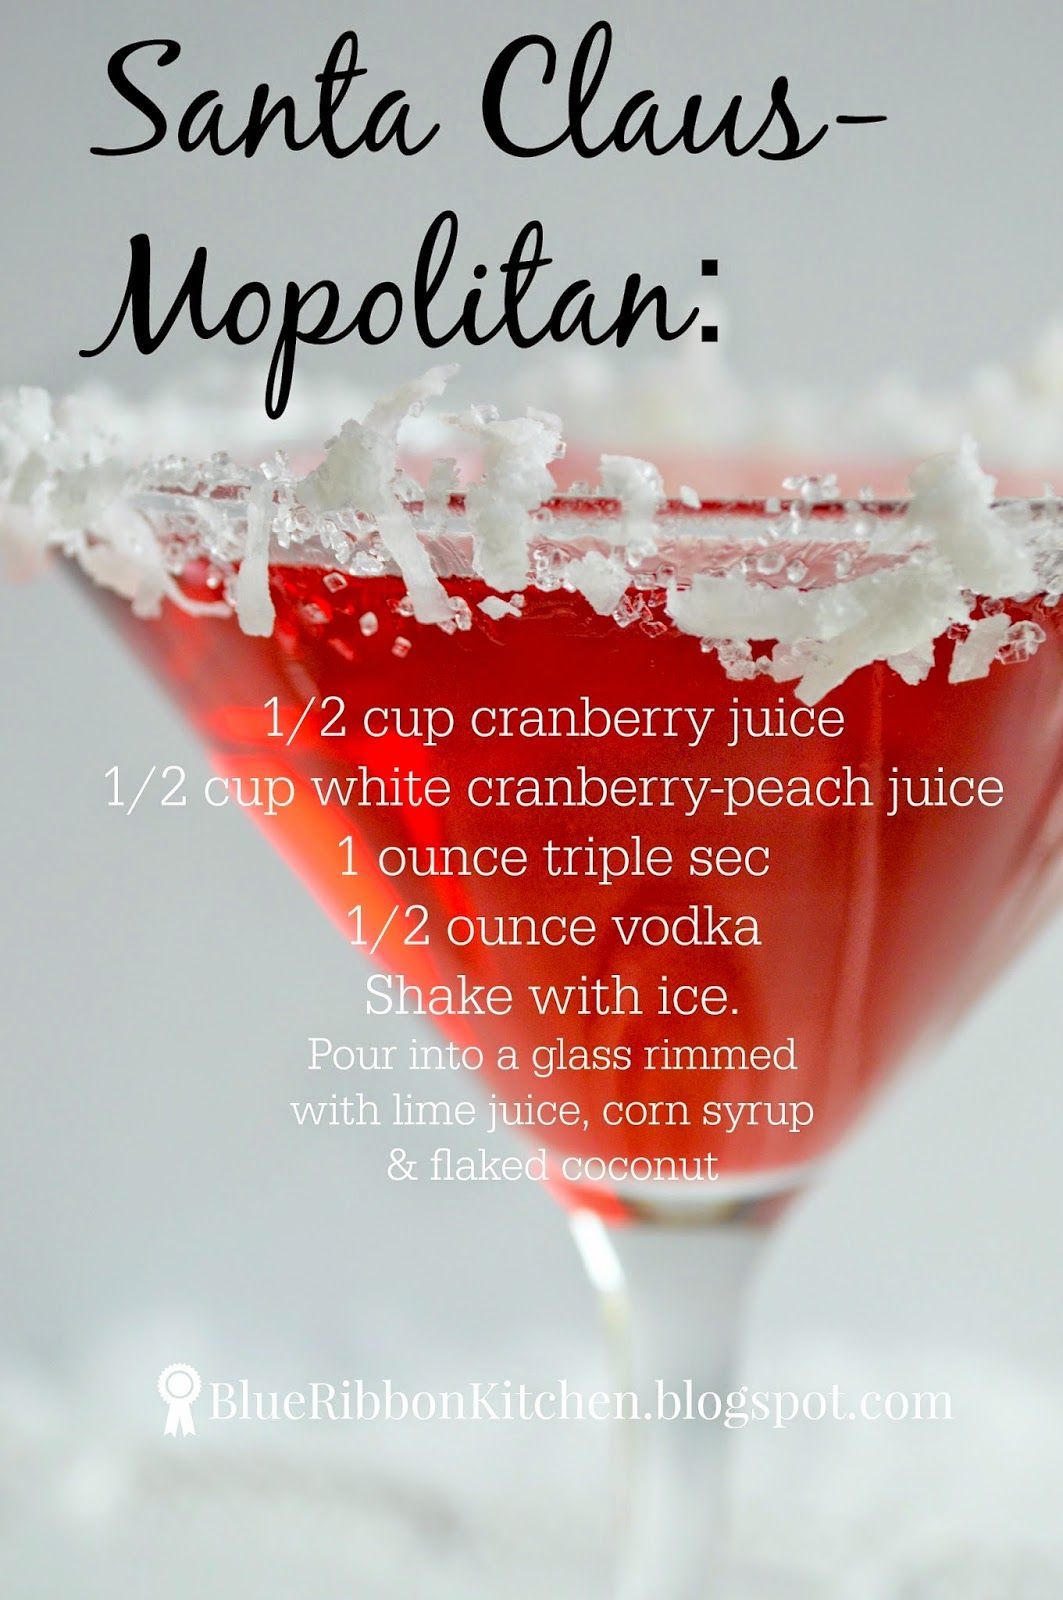 Holiday cosmopolitan signature drink for one serving or for a crowd.  Santa Claus